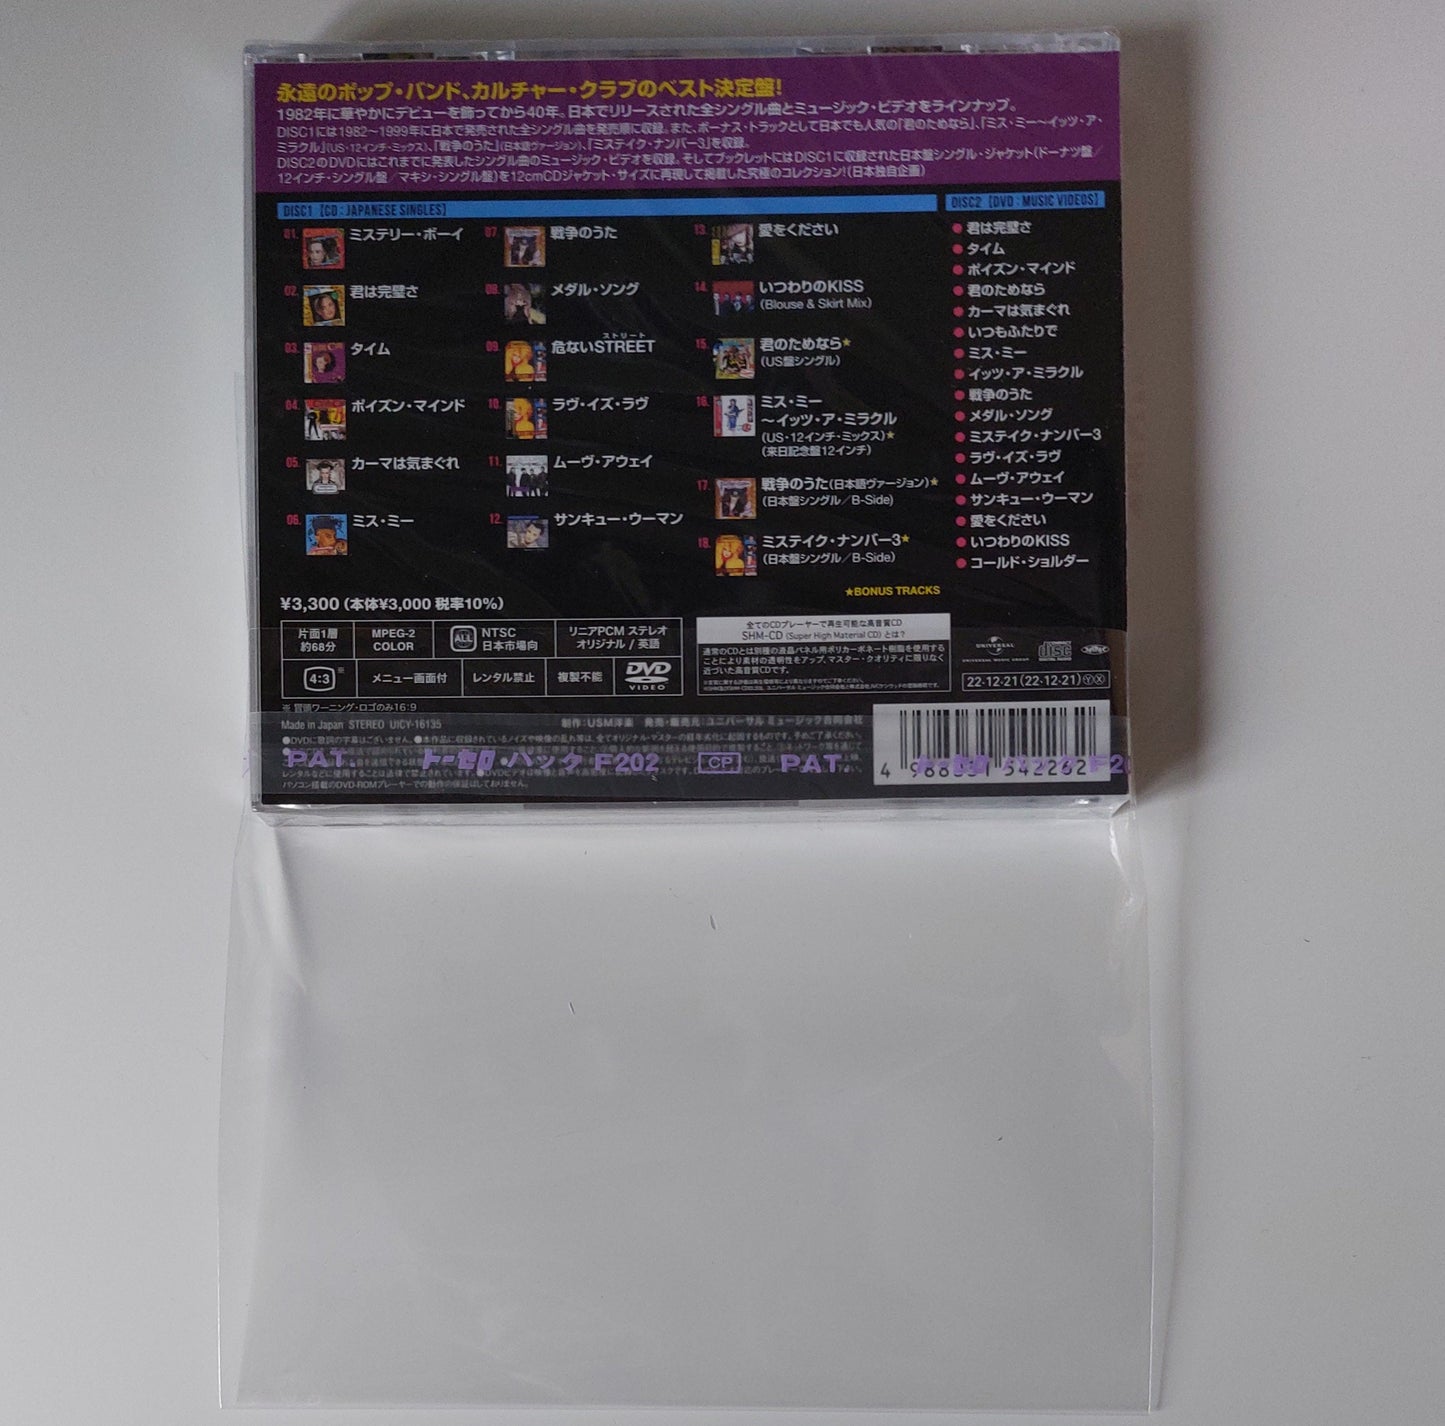 50 CD Jewel Case Resealable Japanese Sleeves